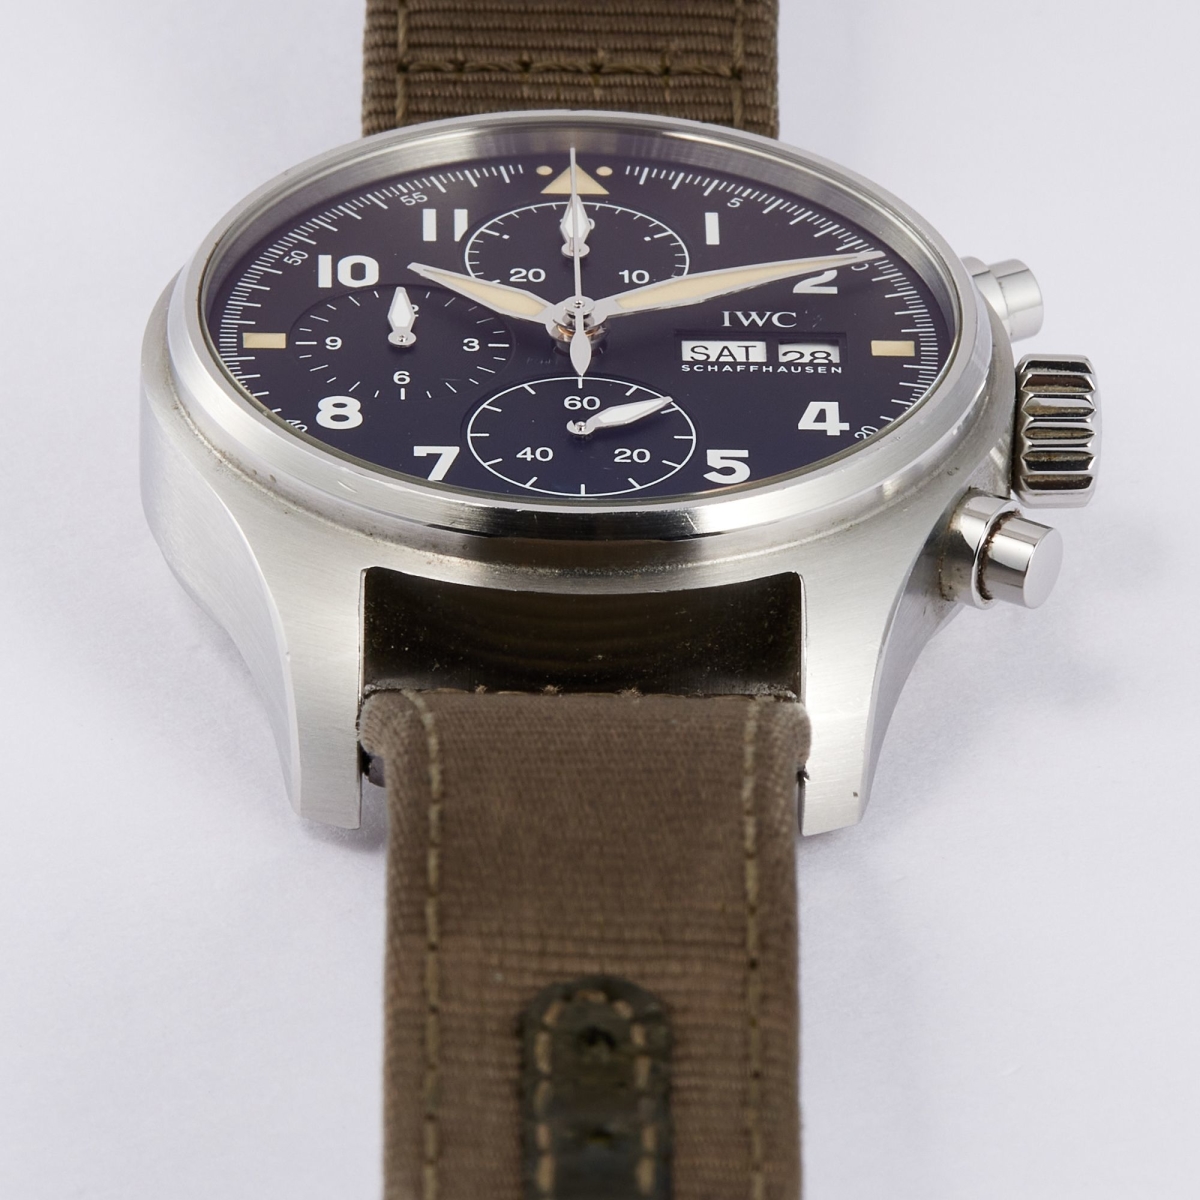 Pilot's Watch Chronograph Spitfire 41 Stainless Steel Black Dial